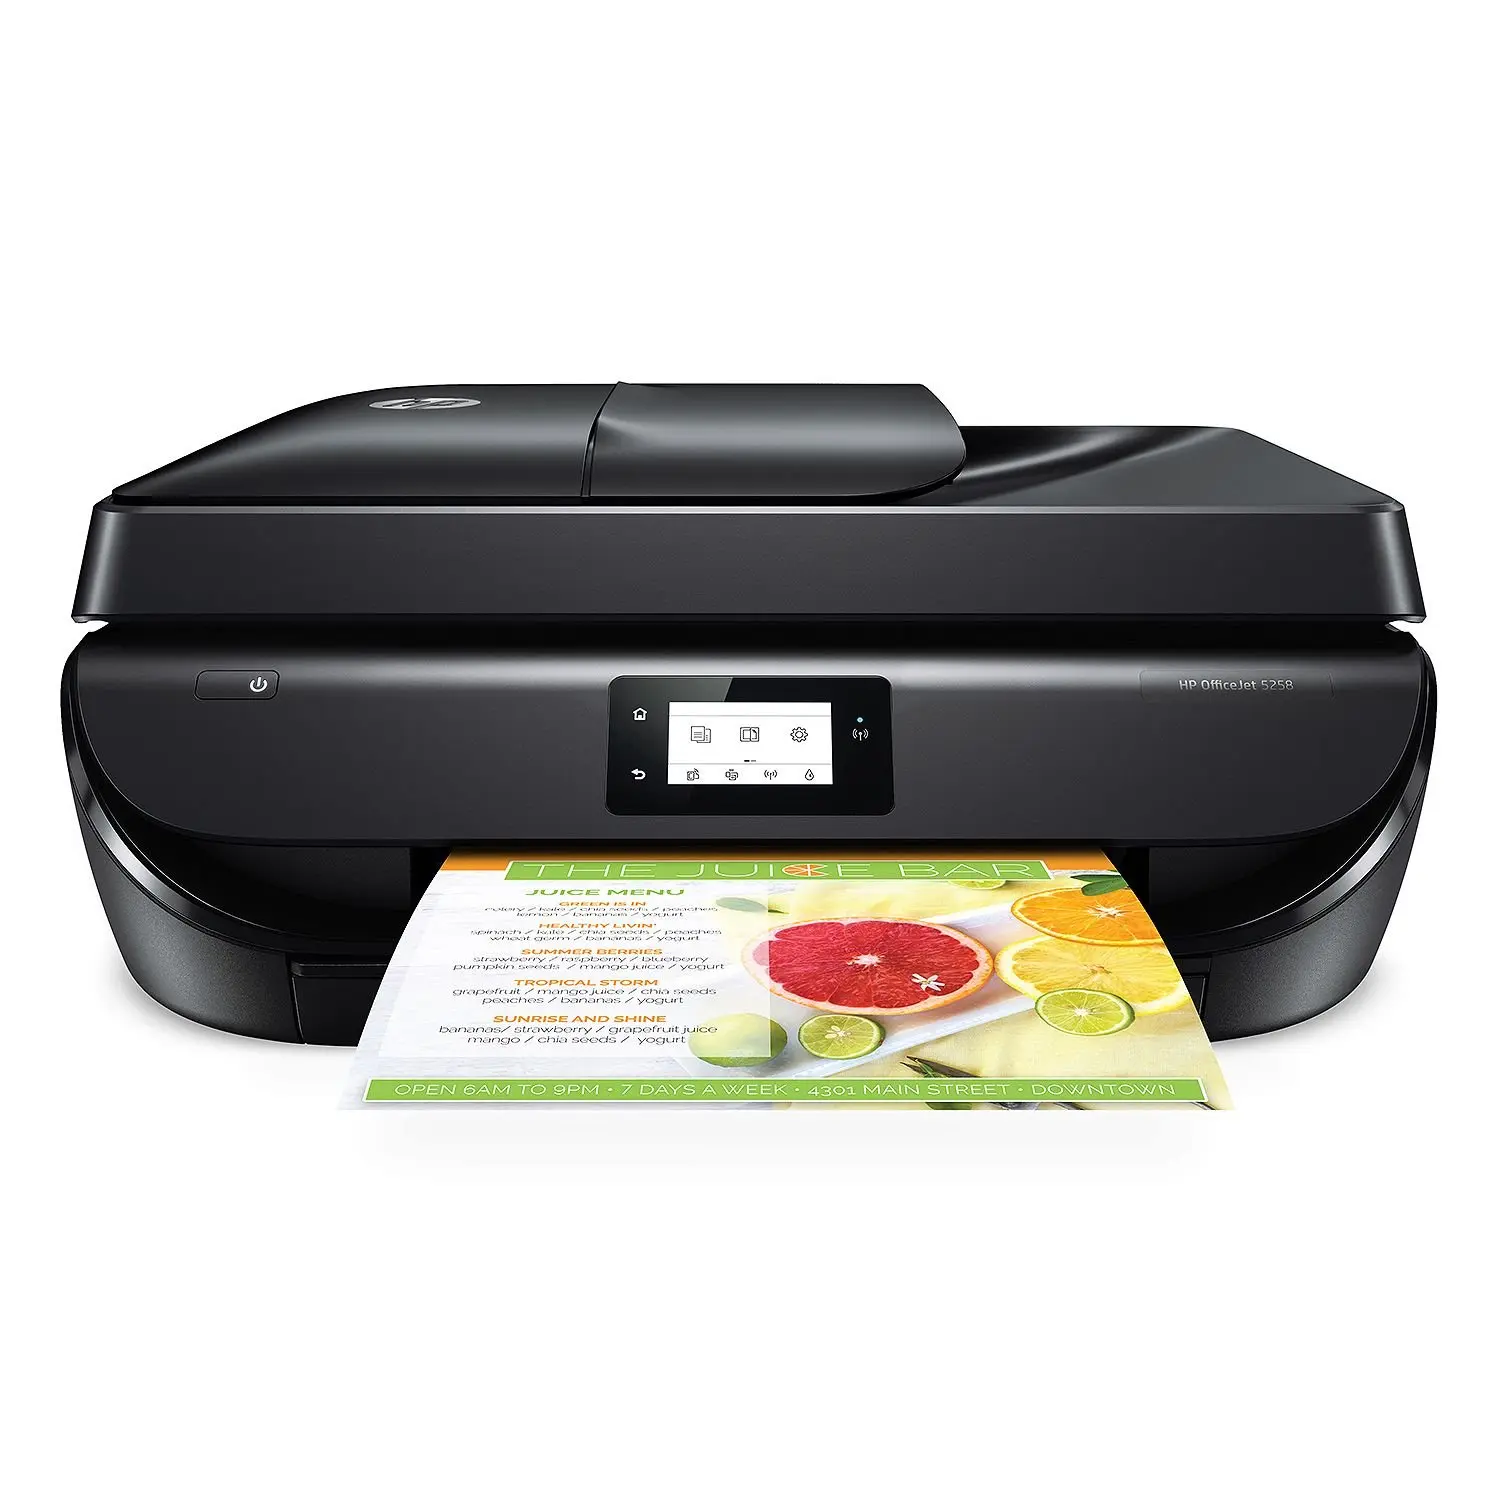 Download hp officejet 5258 printer: step-by-step guide